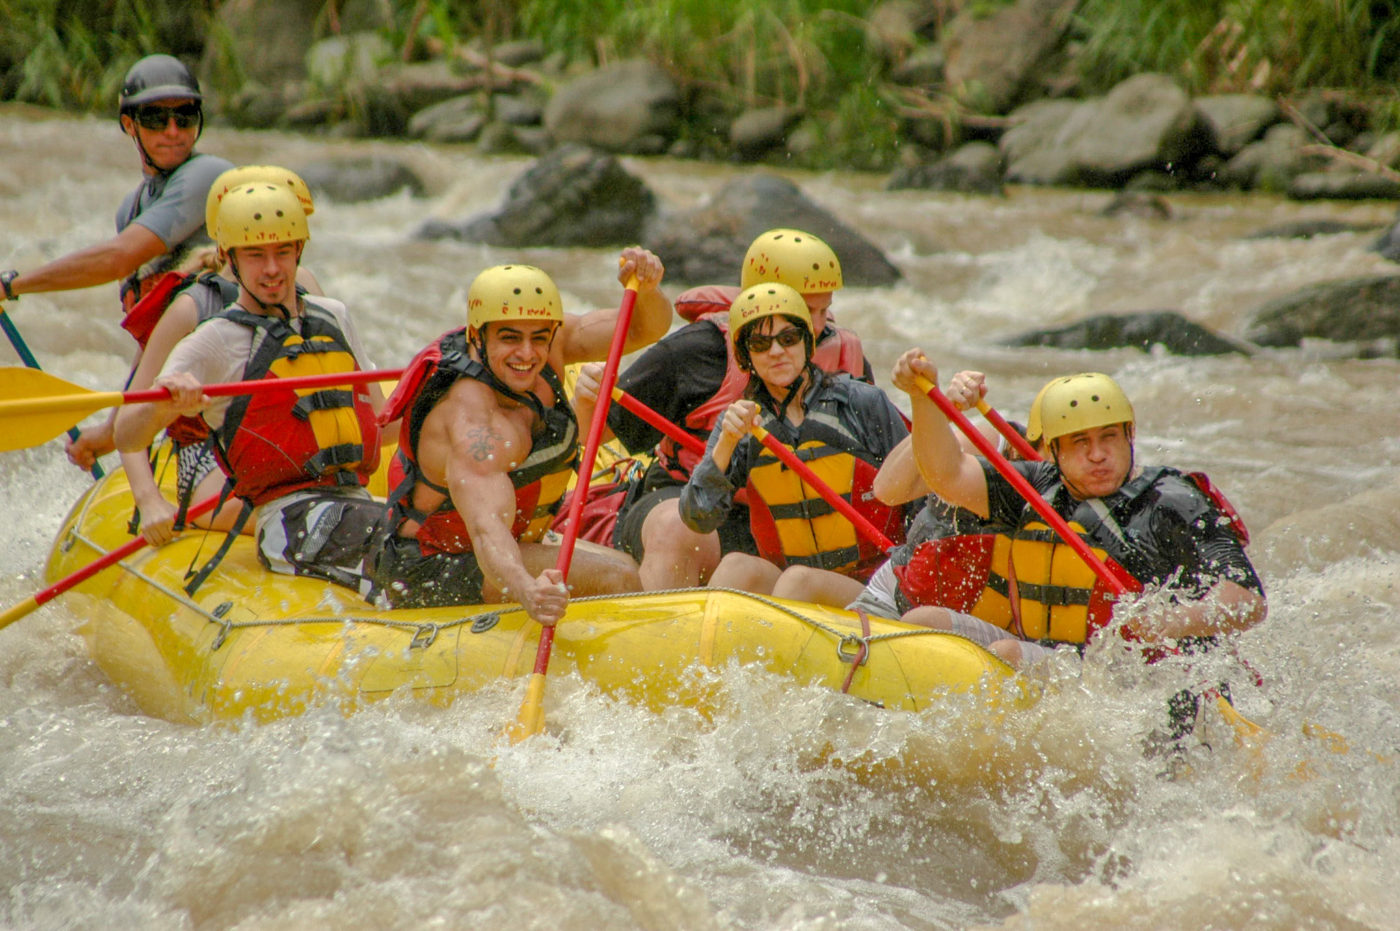 White Water Rafting & Capsizing in Costa Rica’s Pacuare River